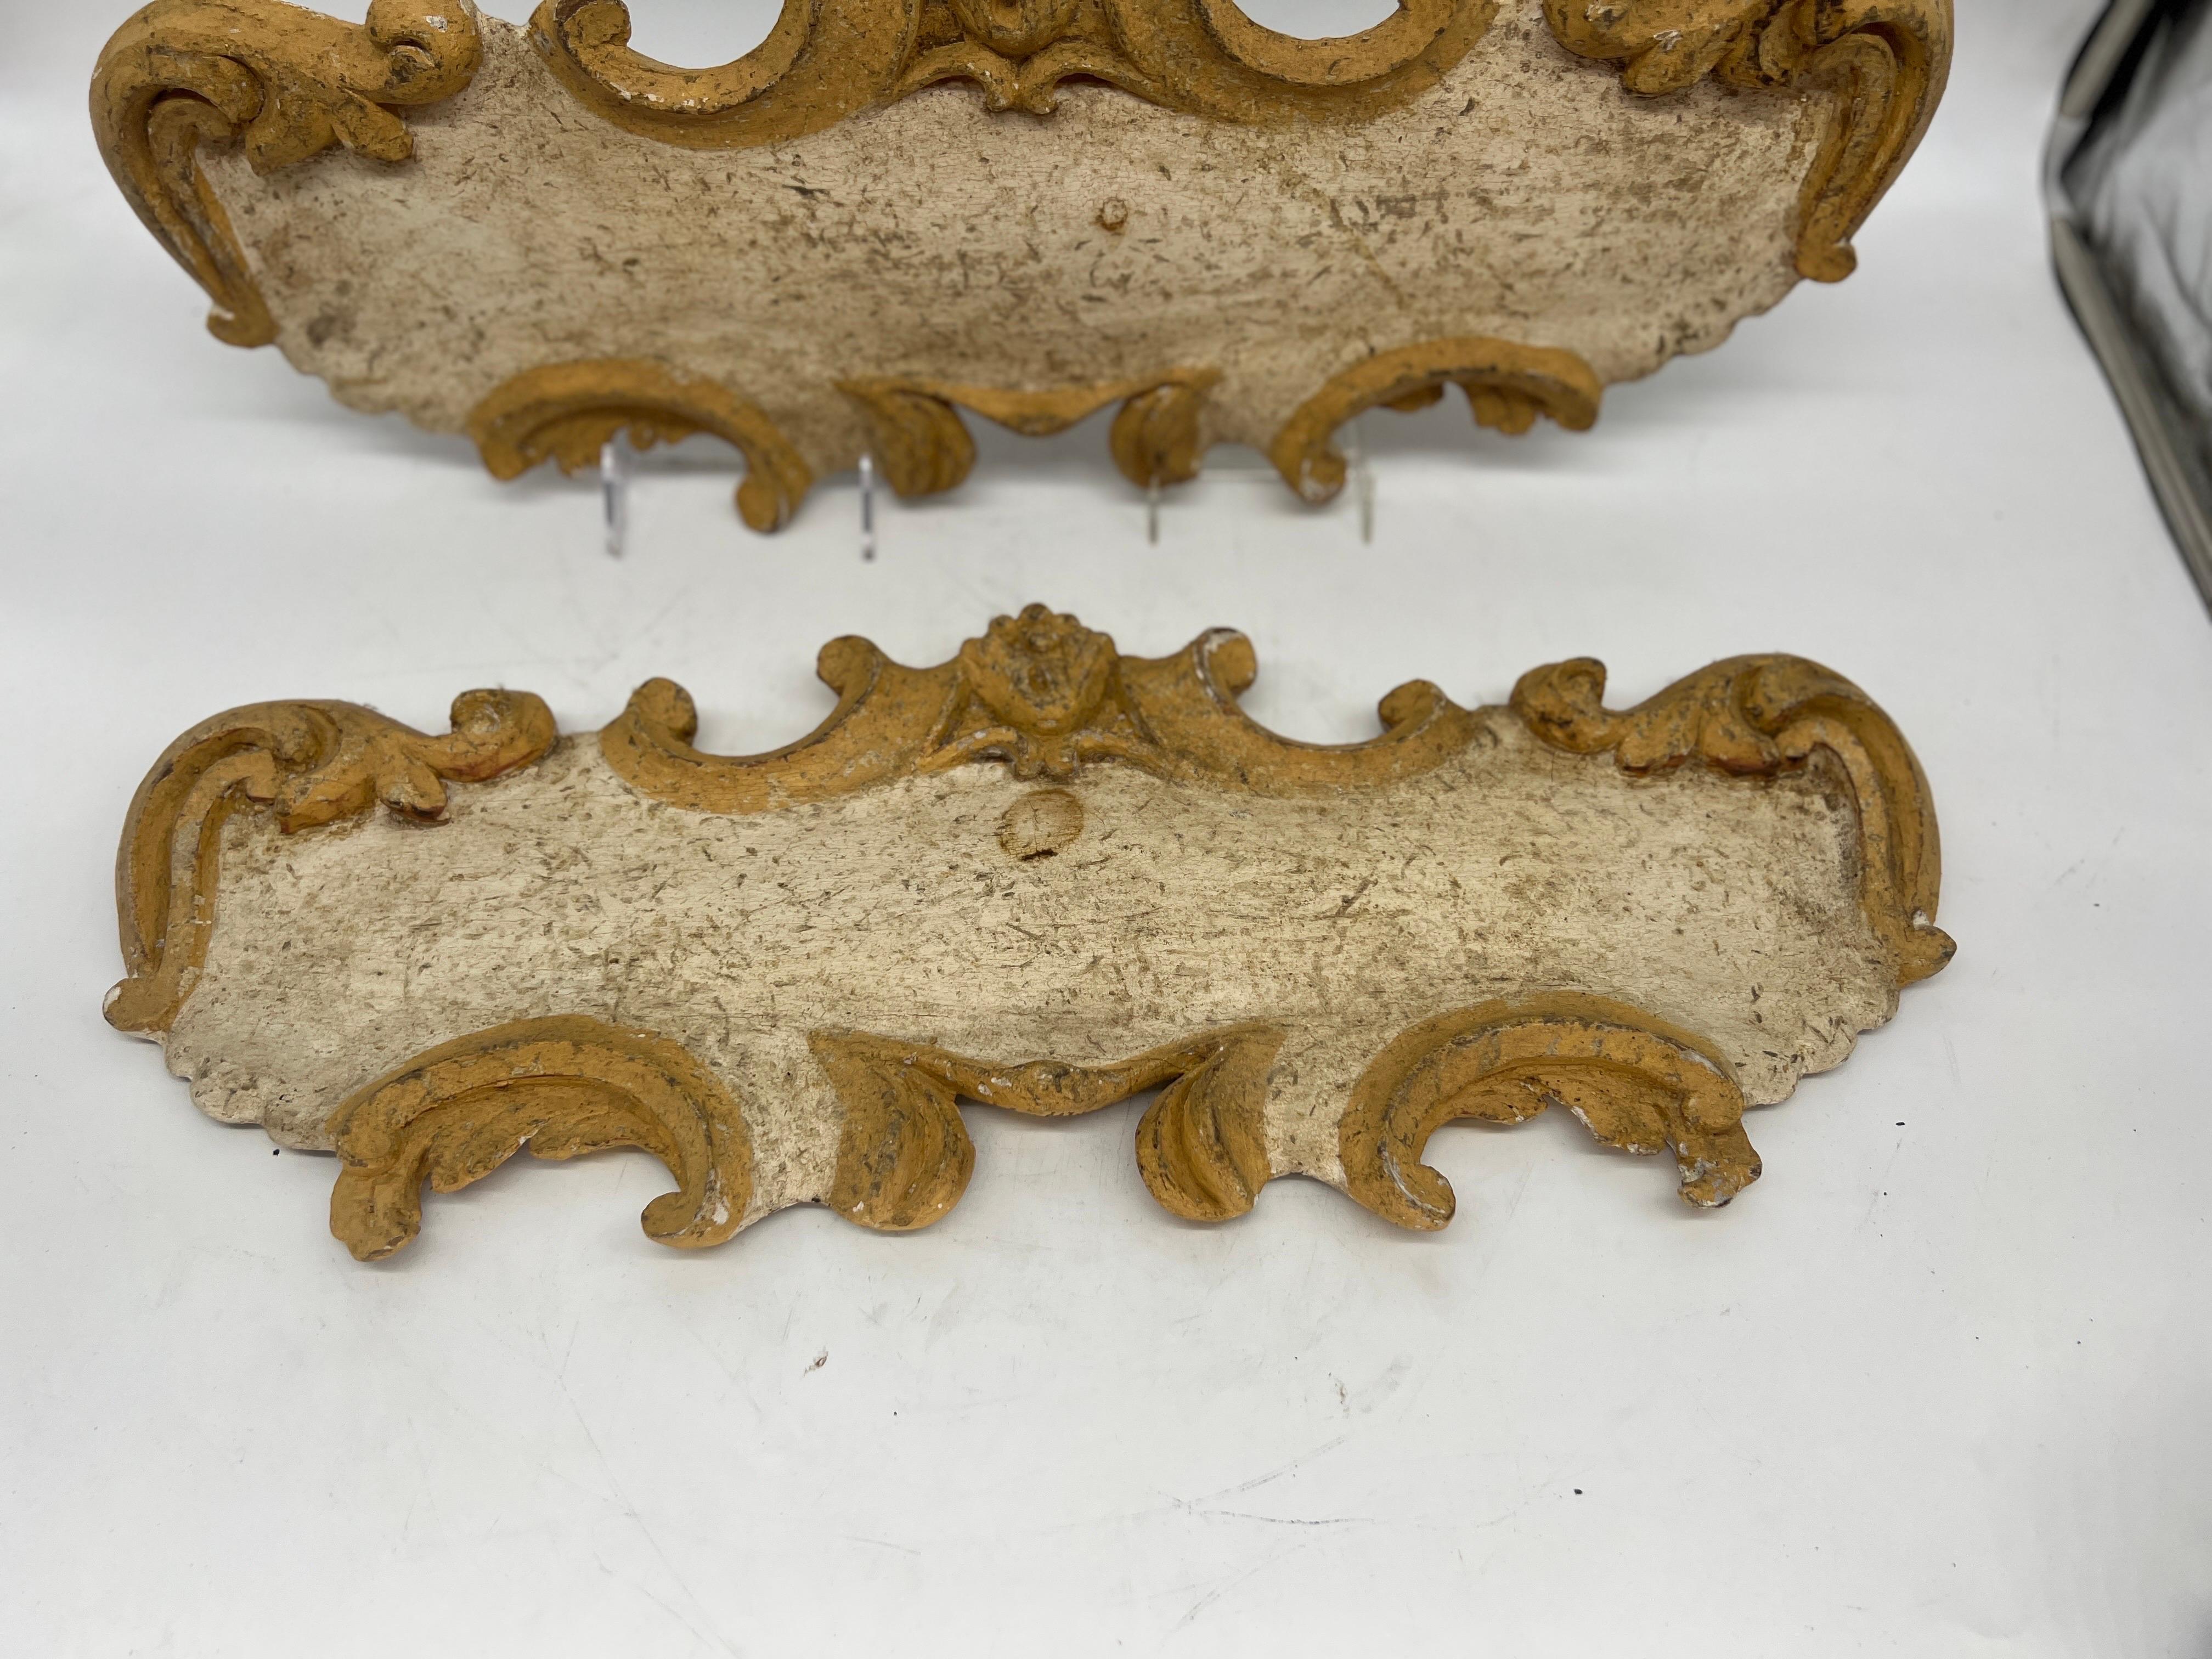 Elevate your interior décor to a level of unparalleled opulence with this magnificent pair of 18th-century French Baroque carved and gilt architectural elements, thoughtfully repurposed as exquisite wall hangings. These remarkable pieces, steeped in